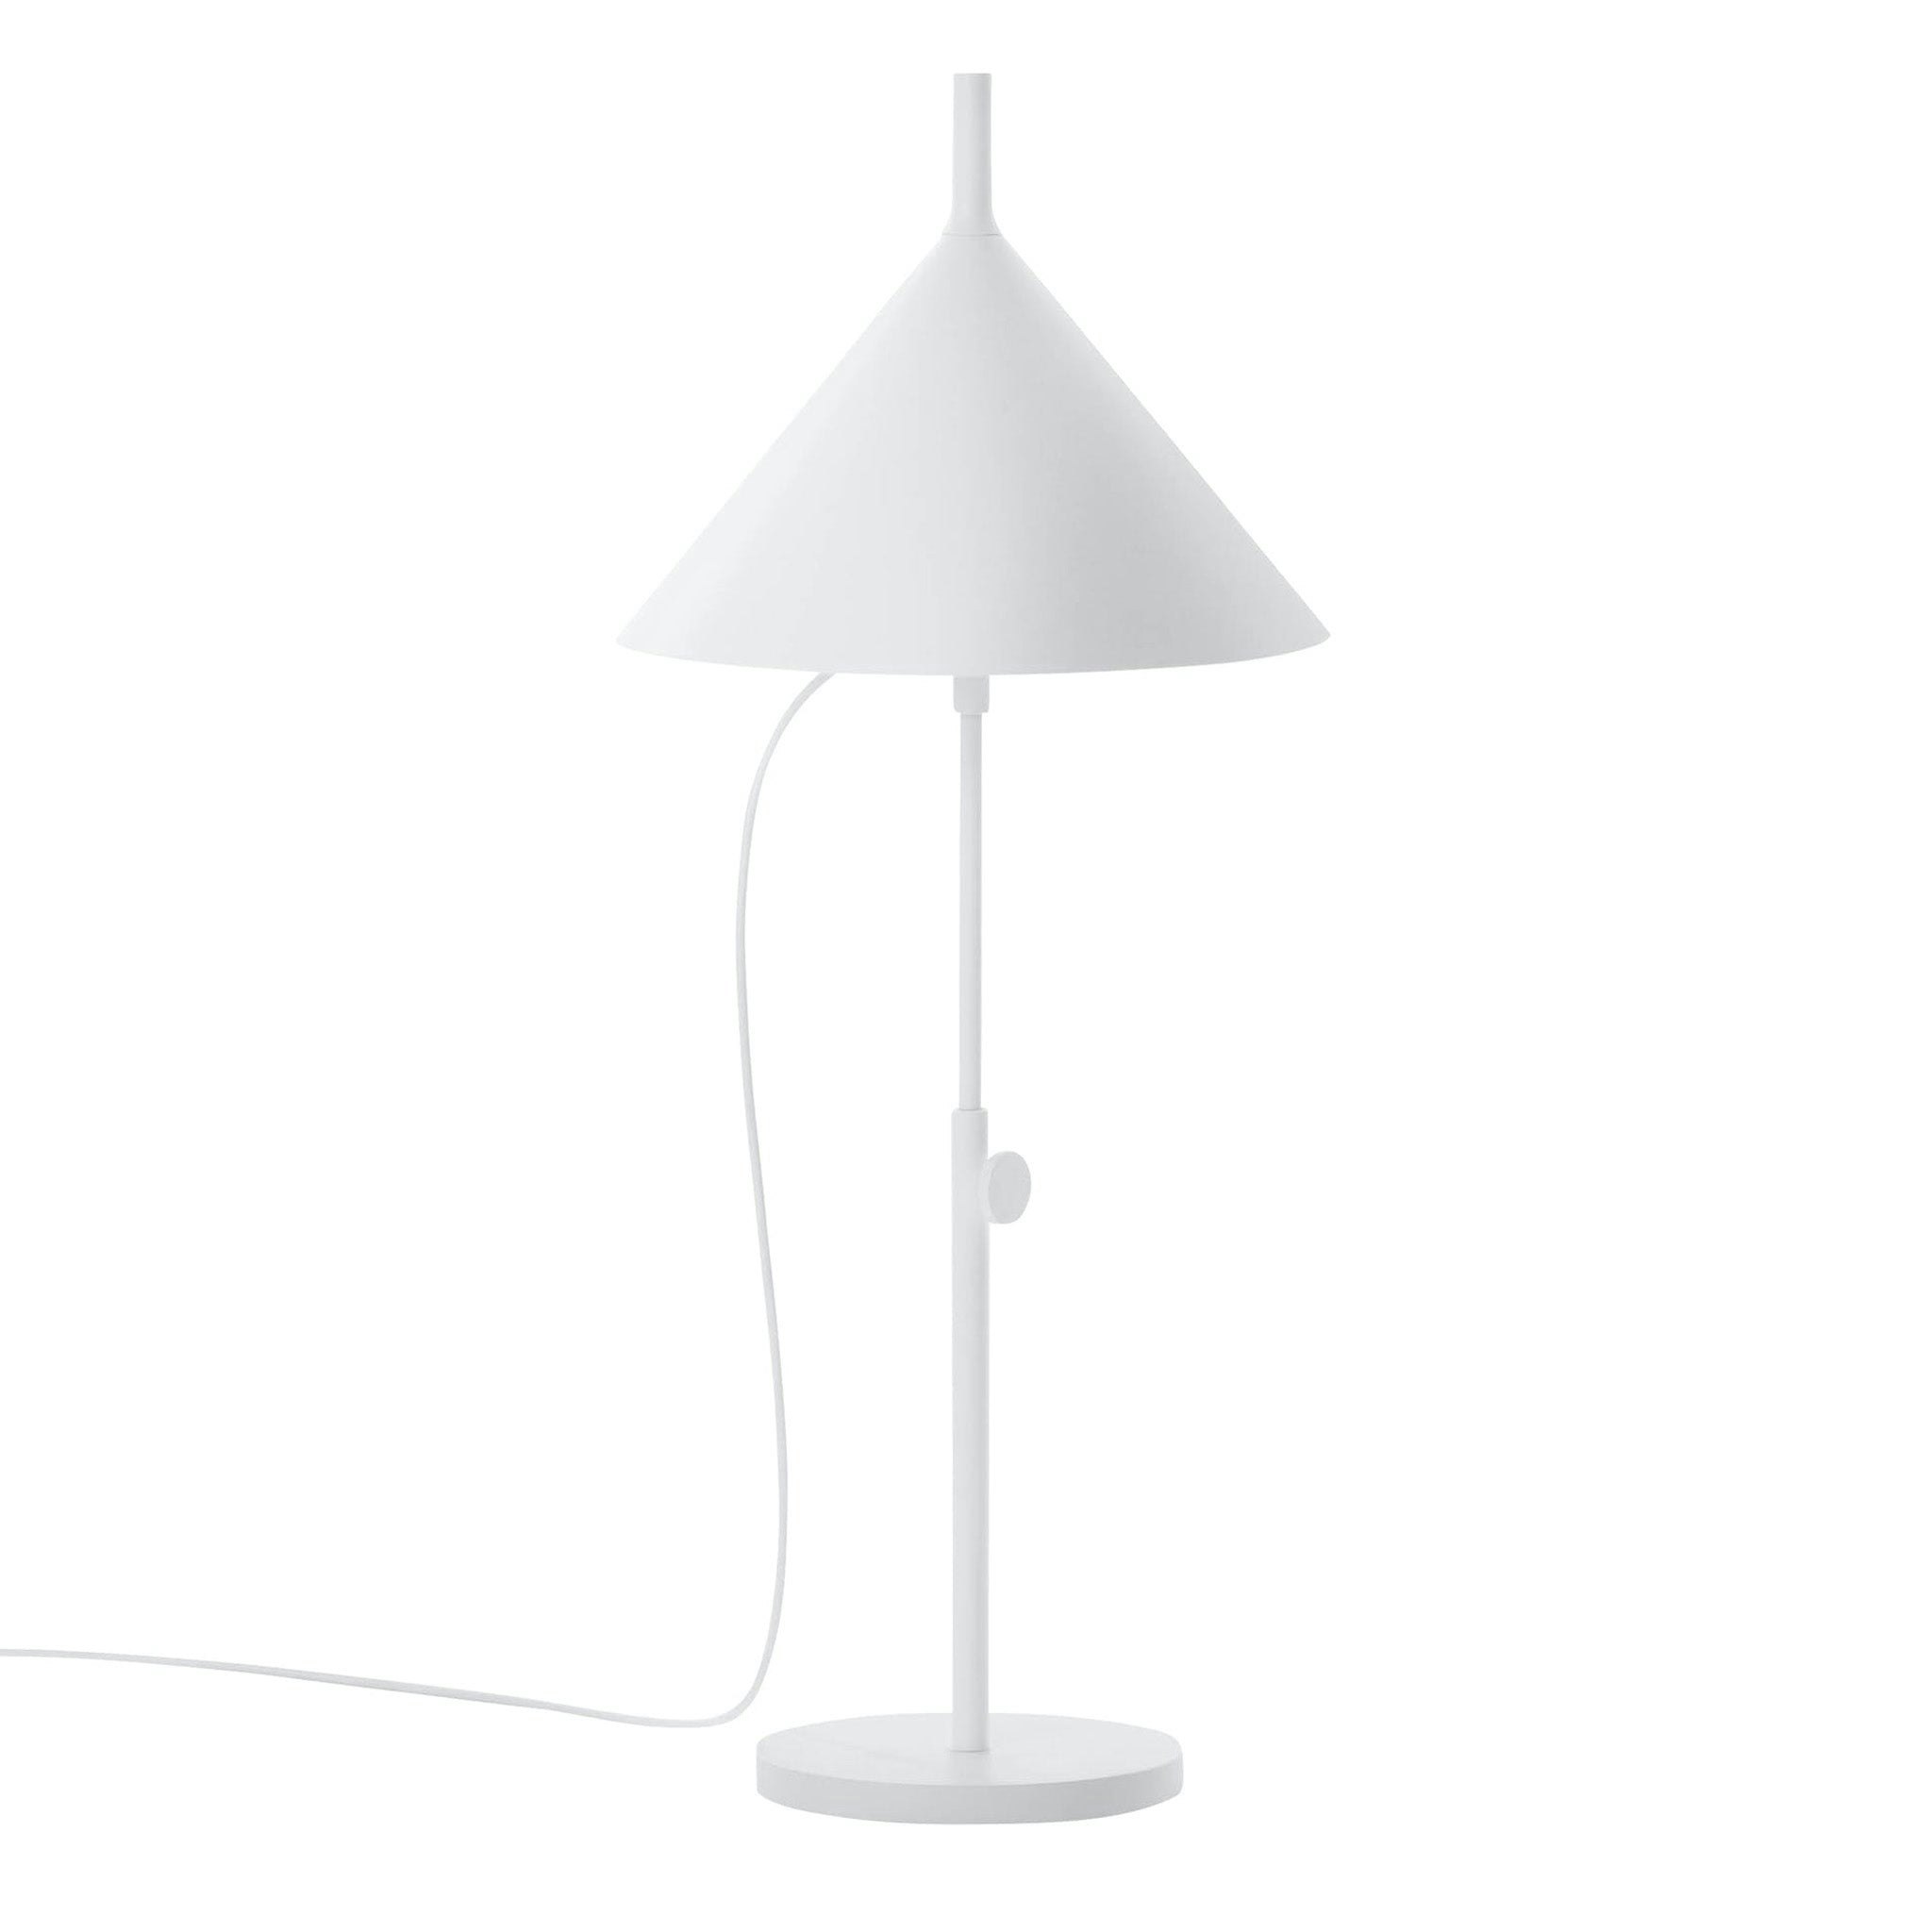 w132 Nendo Table Lamp by Wastberg